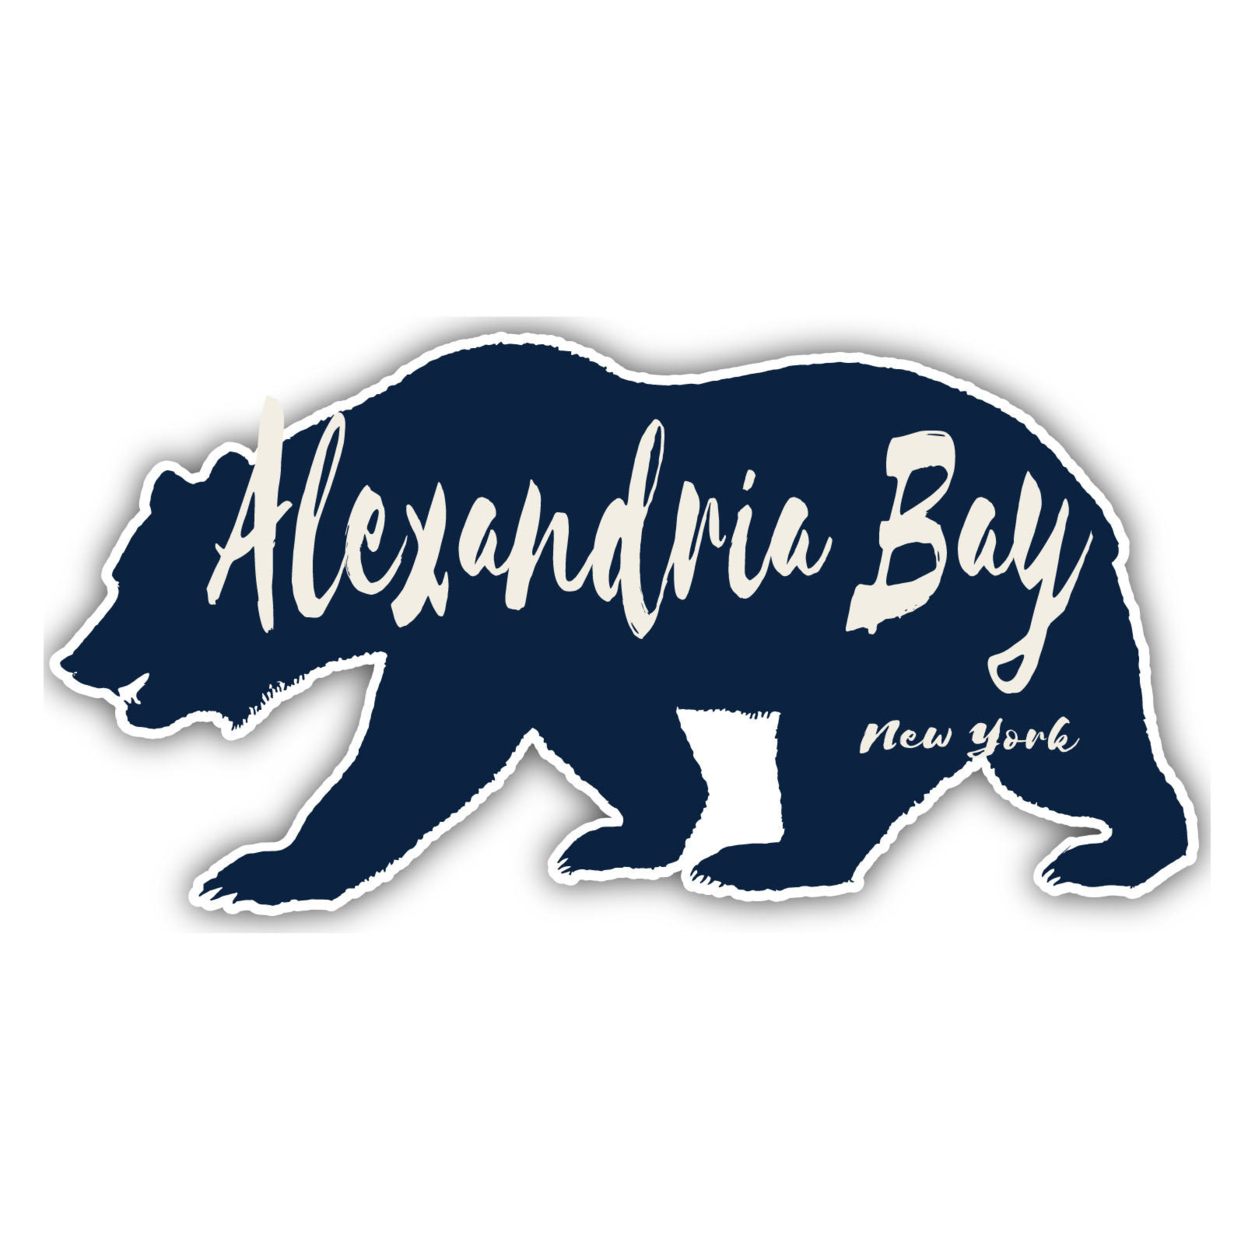 Alexandria Bay New York Souvenir Decorative Stickers (Choose Theme And Size) - 4-Pack, 6-Inch, Bear